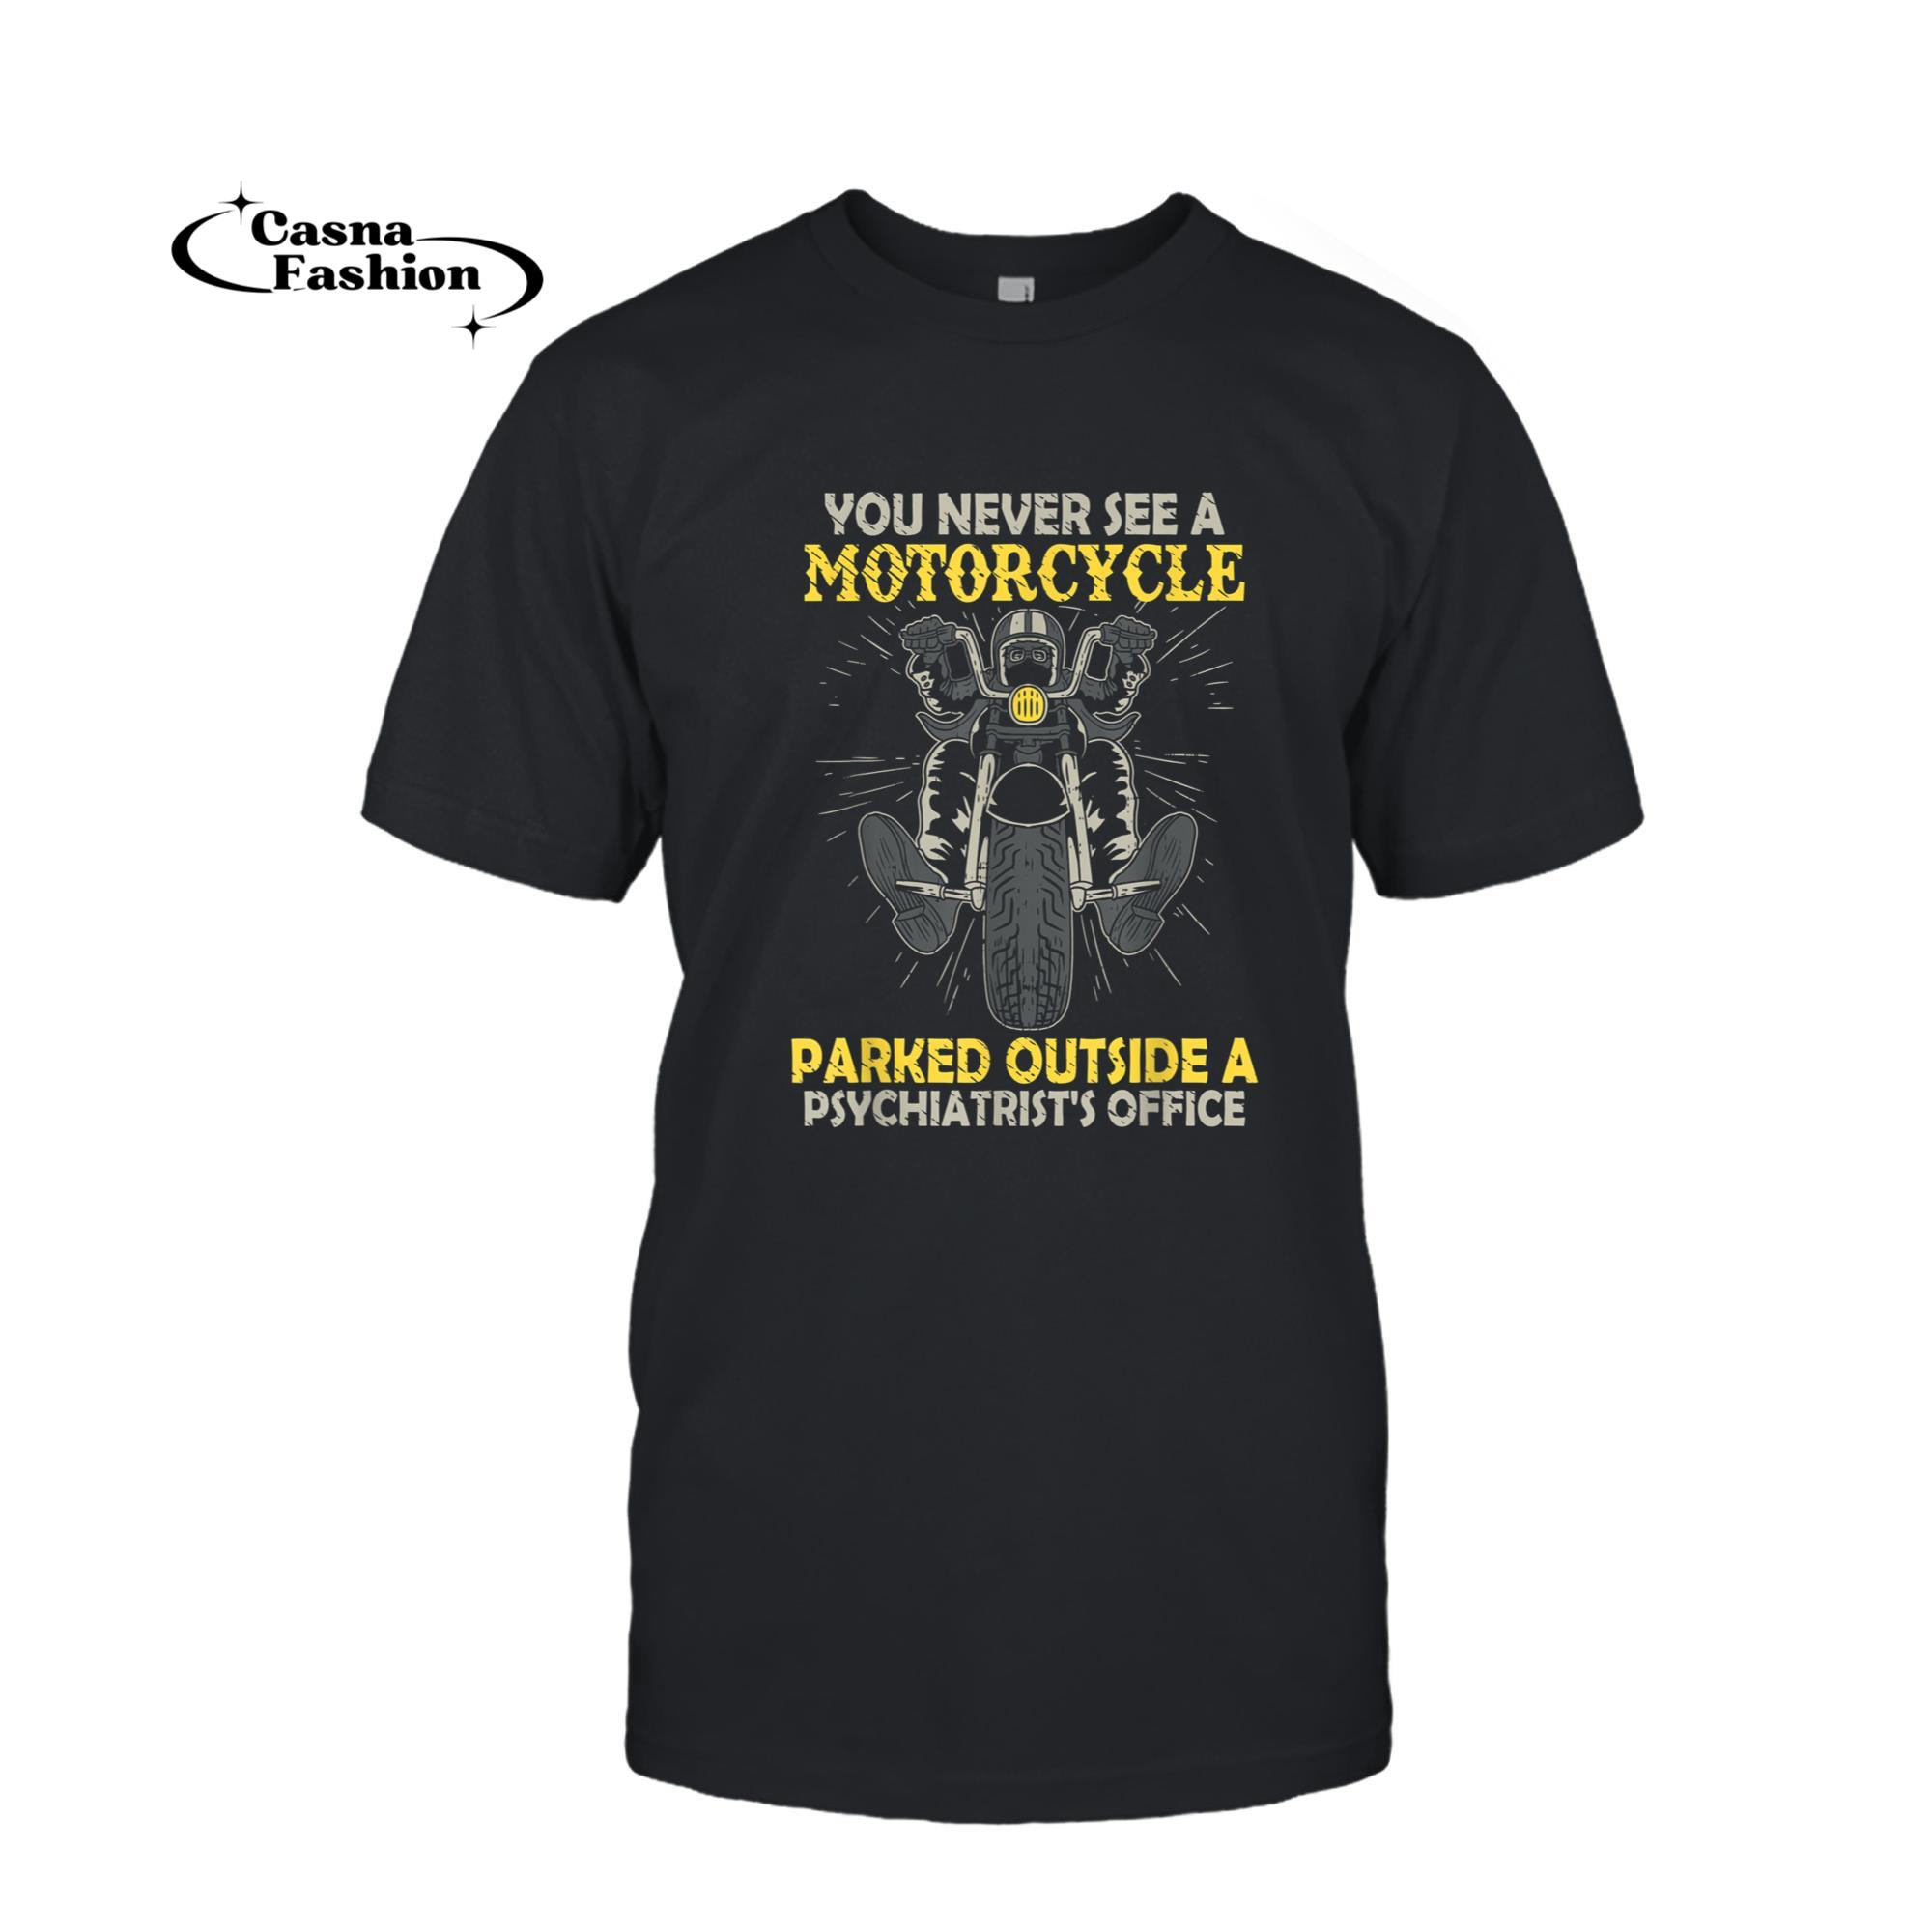 casnafashion_T-shirt_You Never See A Motorcycle Parked Outside A Psychiatrist T-Shirt_T-shirt_Black